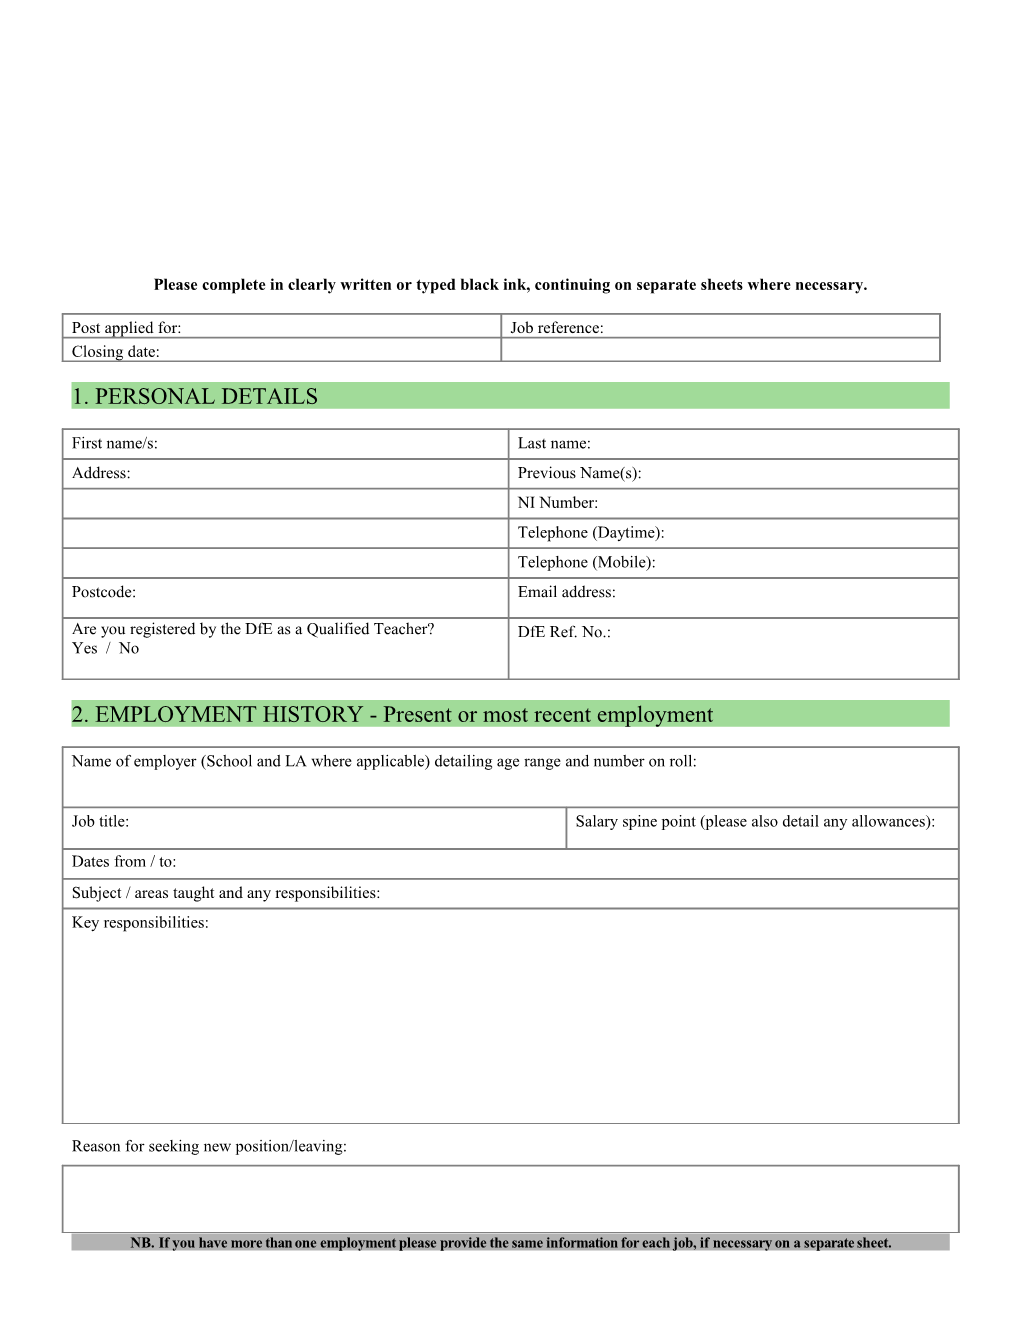 Application for Employment s142